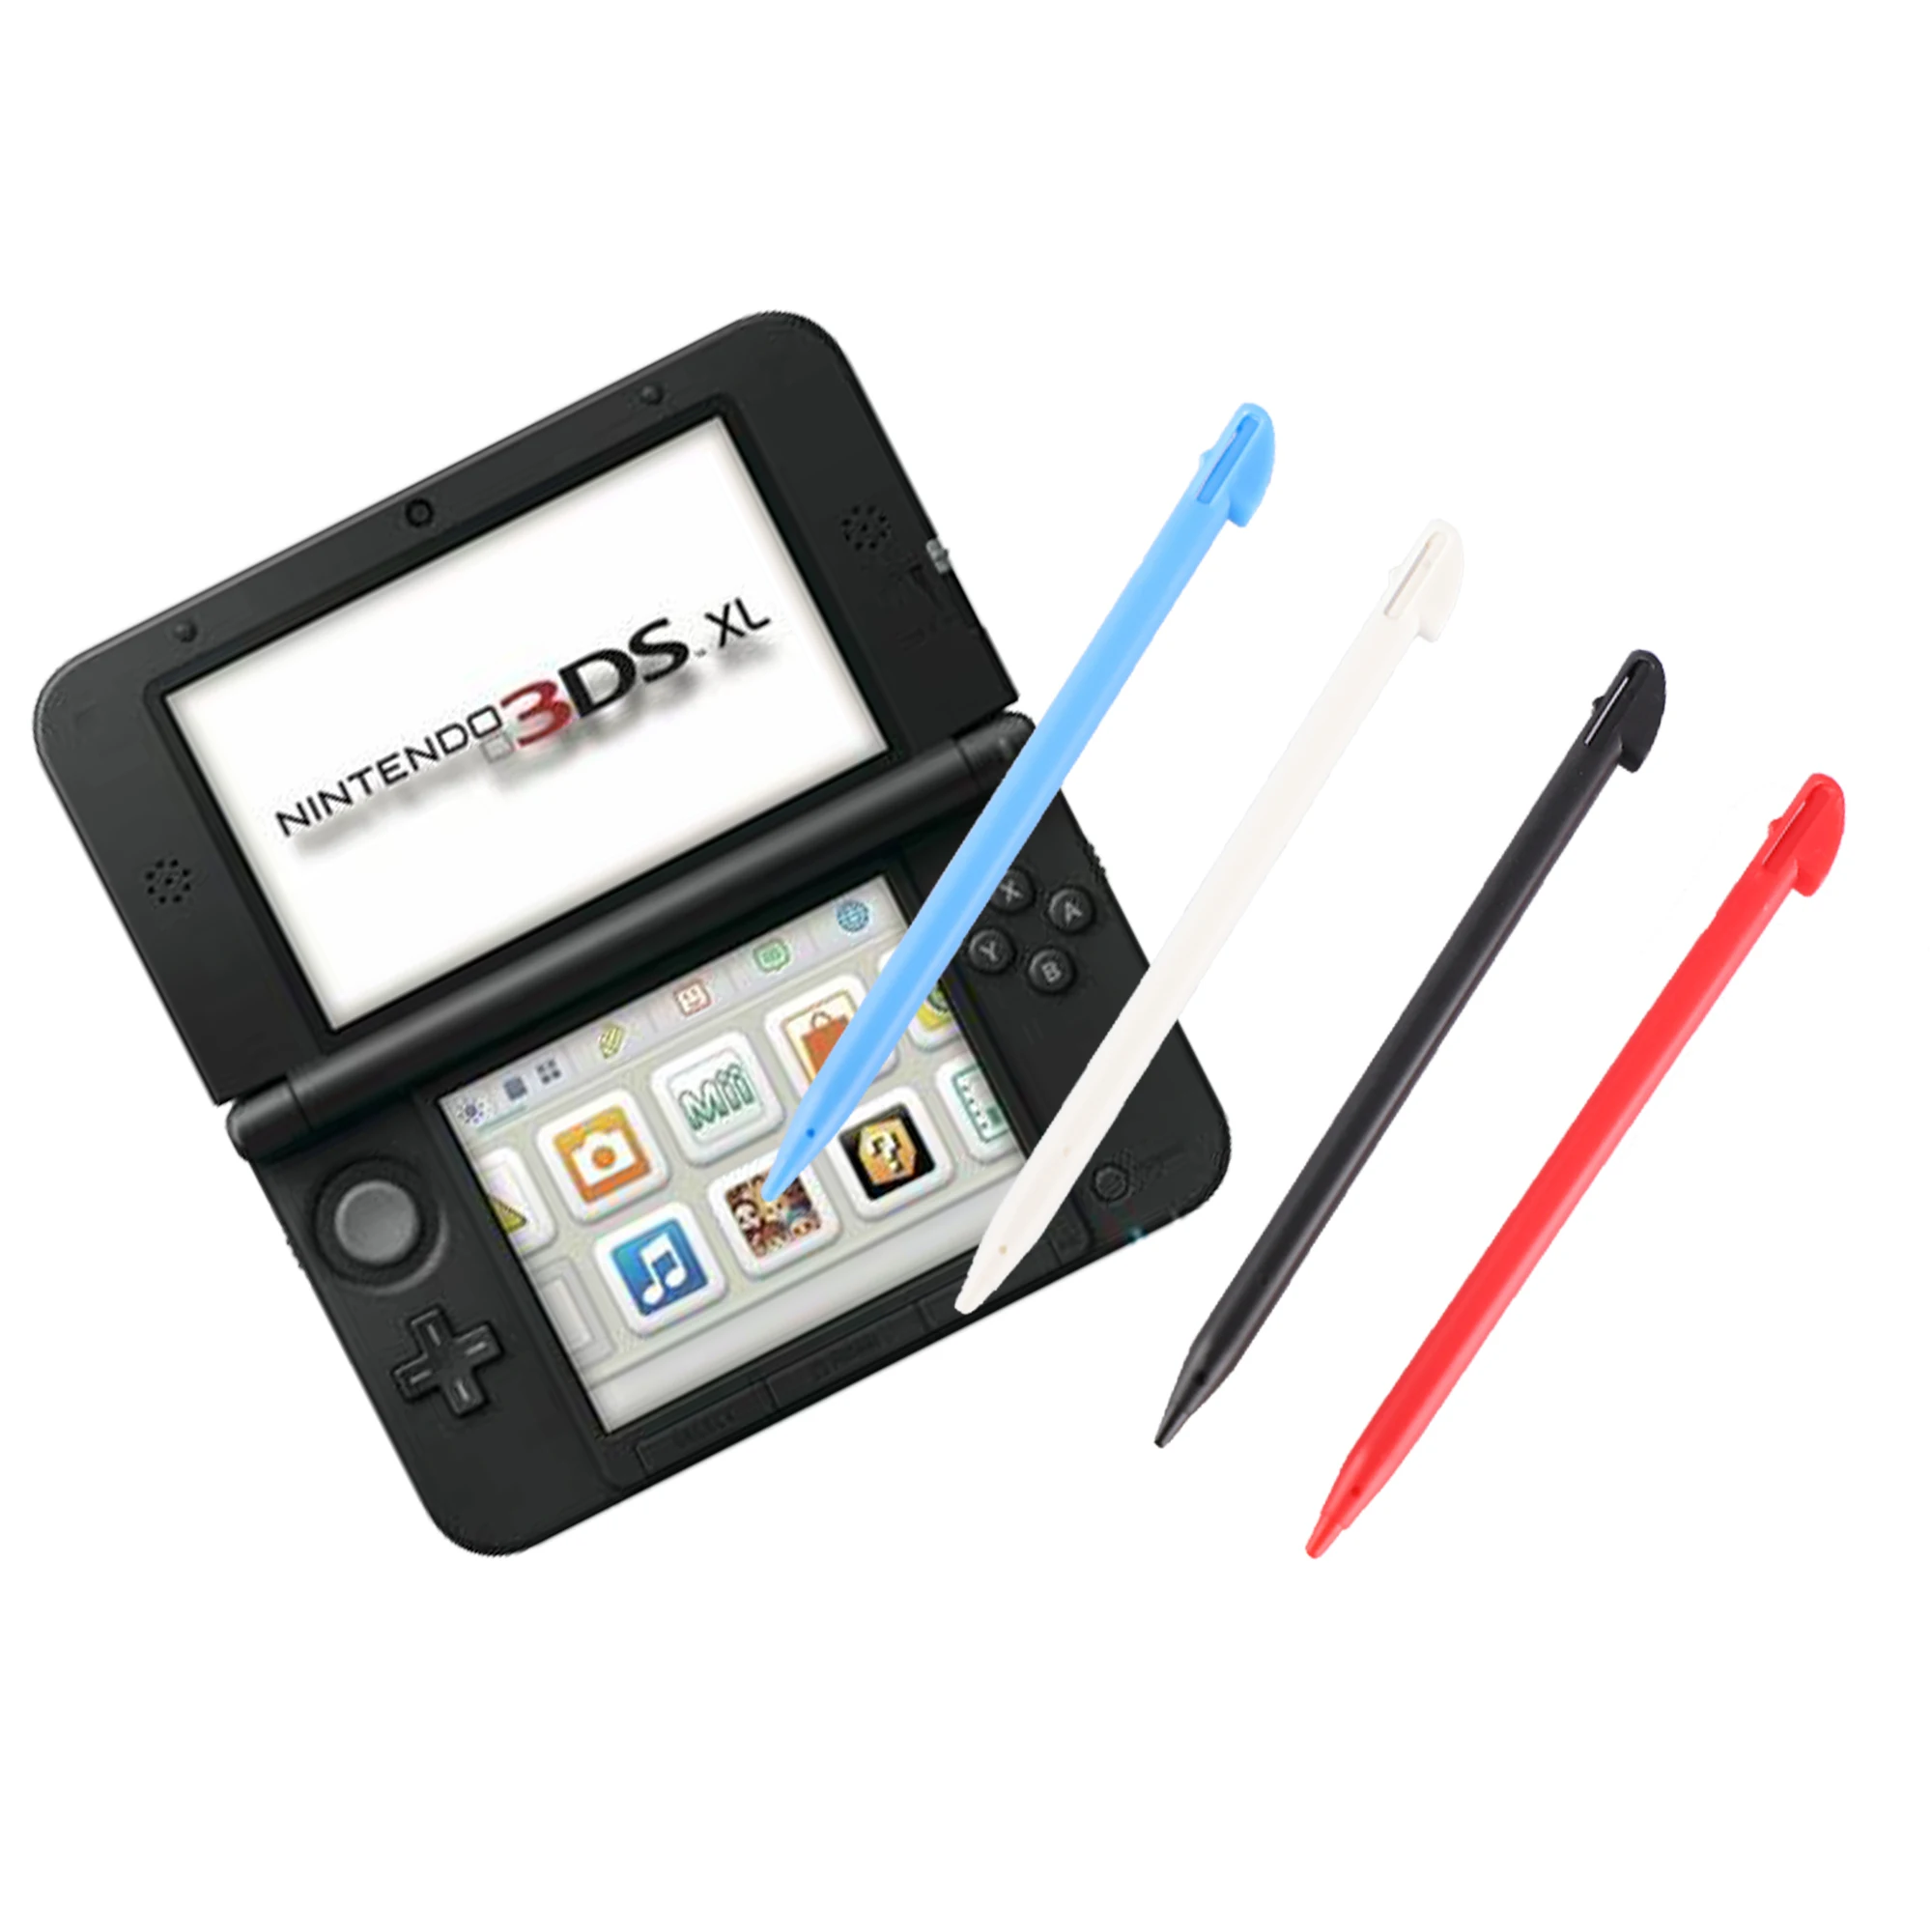 3DS XL Stylus Pen, Replacement Stylus compatible with Nintendo 3DS XL, 4 in  1 Combo Touch Styli Pen Set Multi Color for 3DS XL